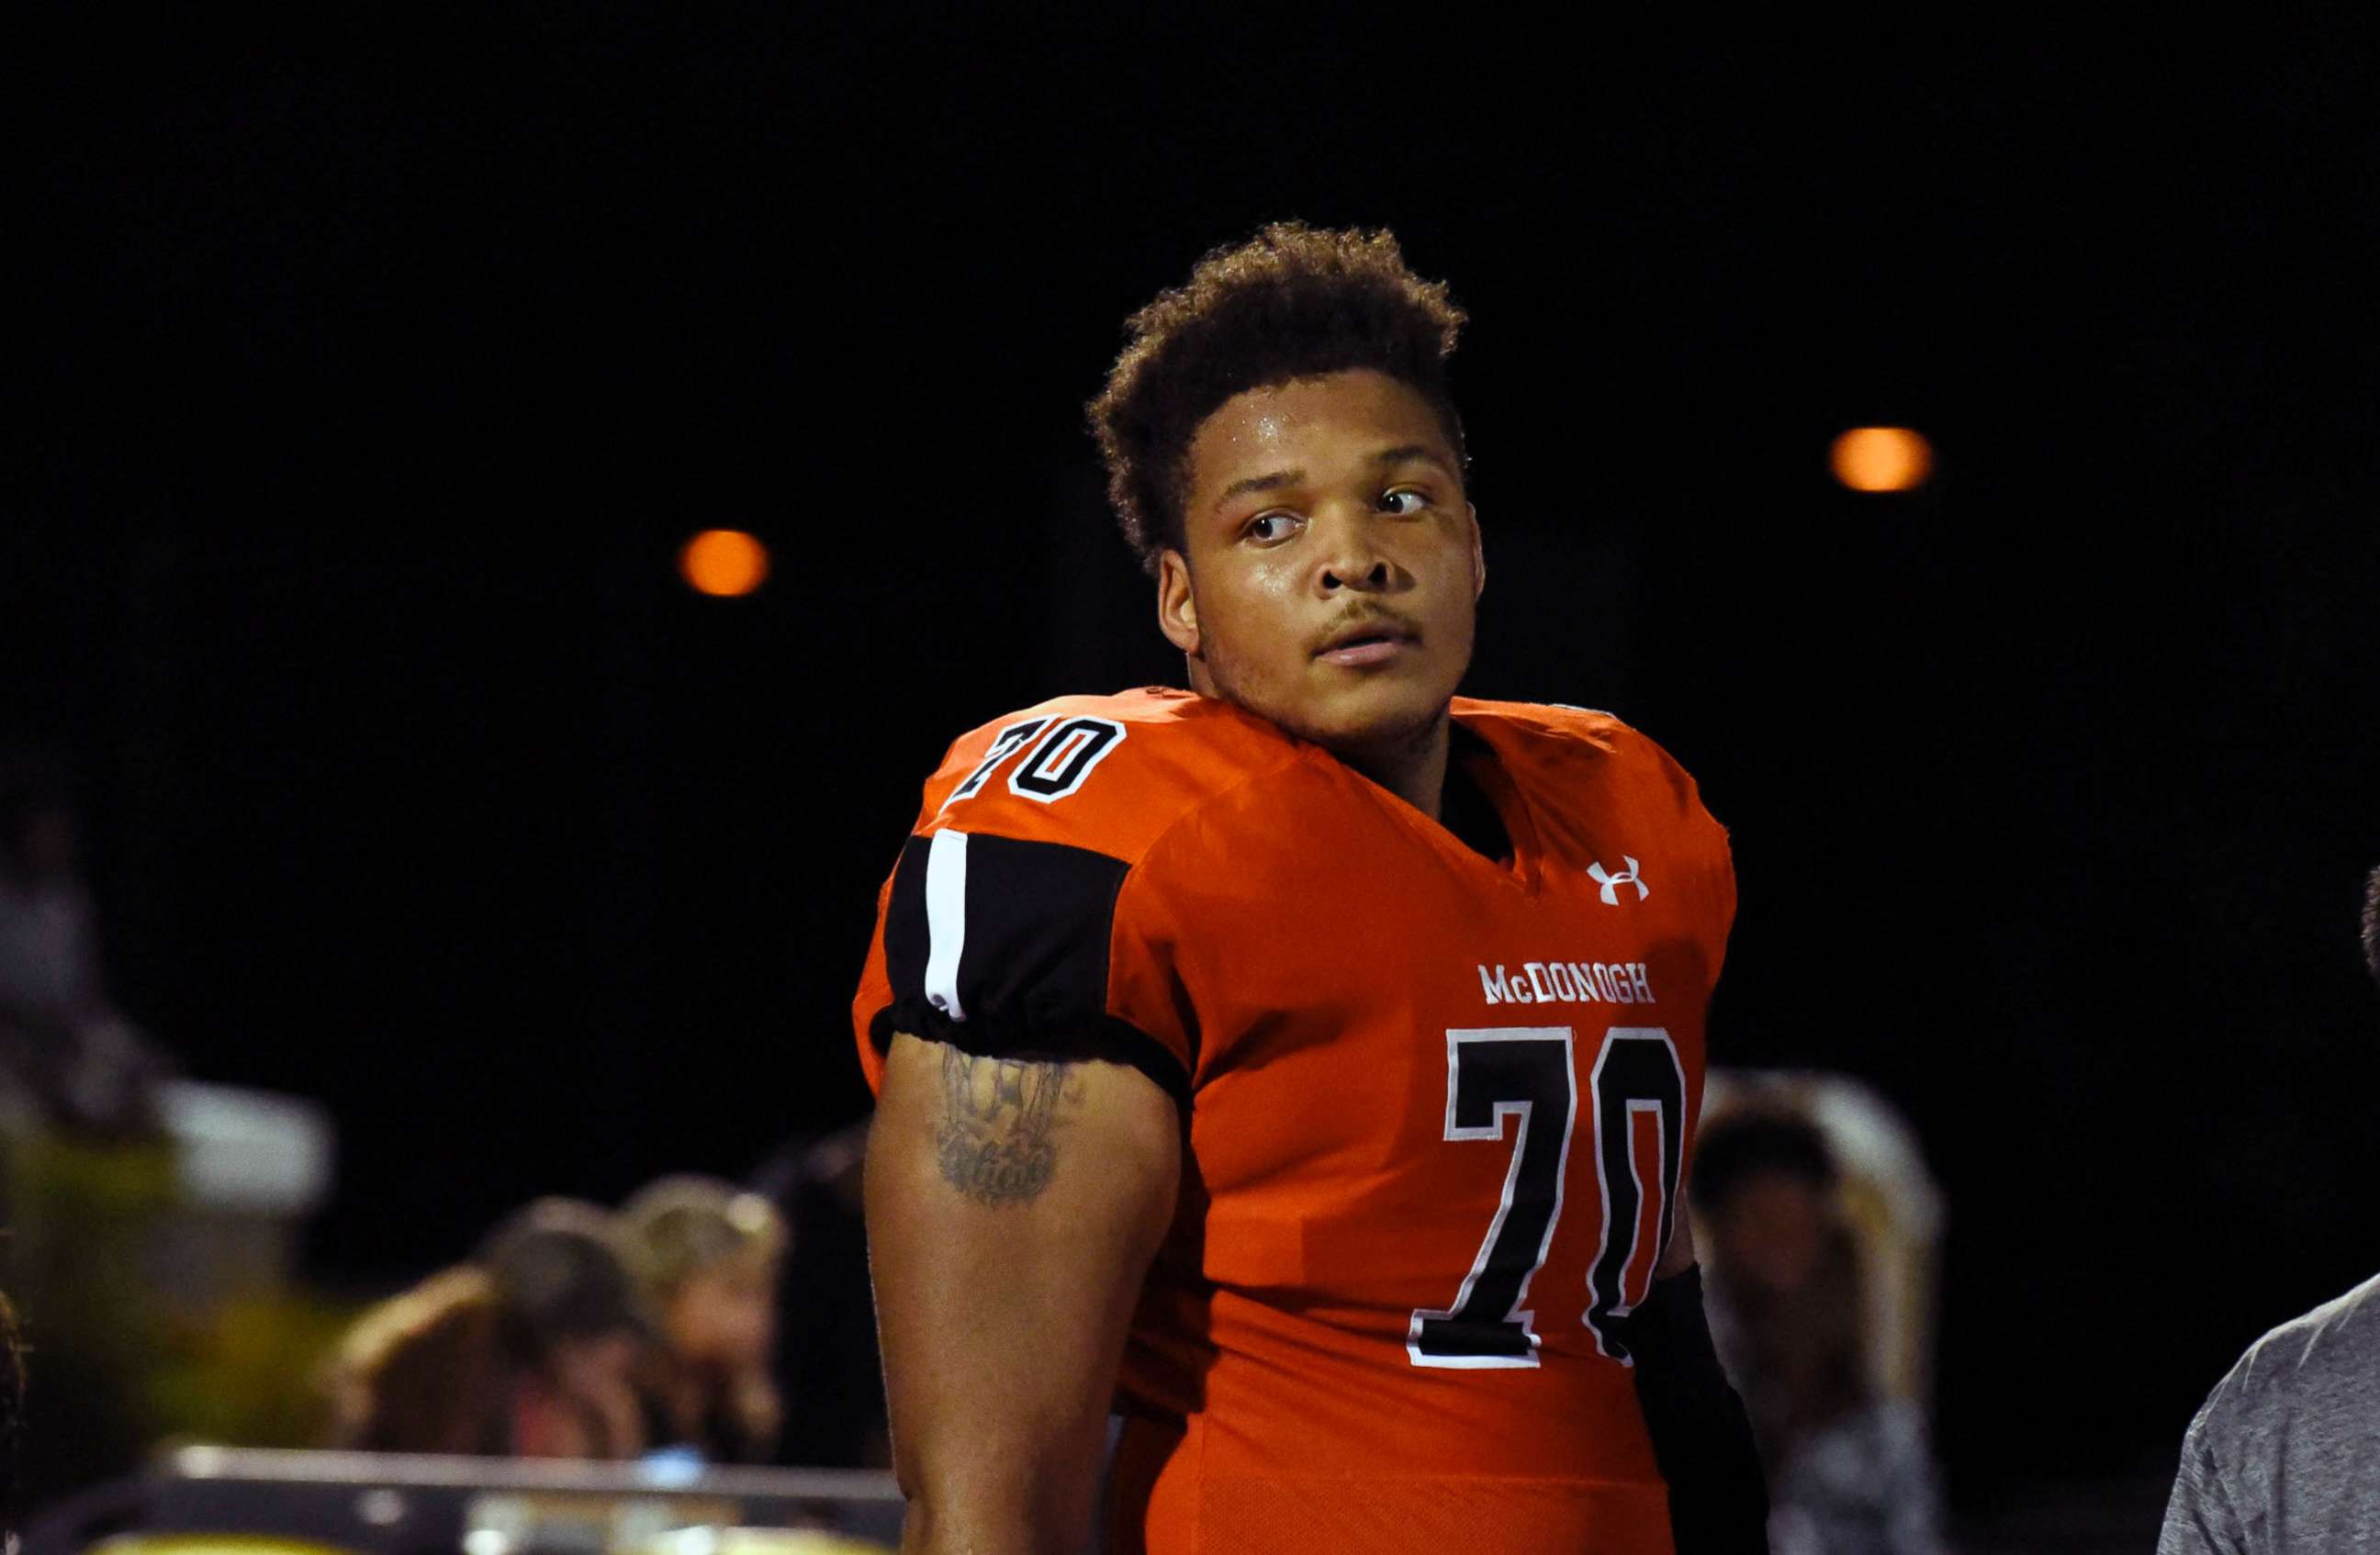 PHOTO: In a Sept. 16, 2016 file image, lineman Jordan McNair of McDonogh High School, with the University of Maryland, died June 13, 2018, two weeks after collapsing during a team workout.